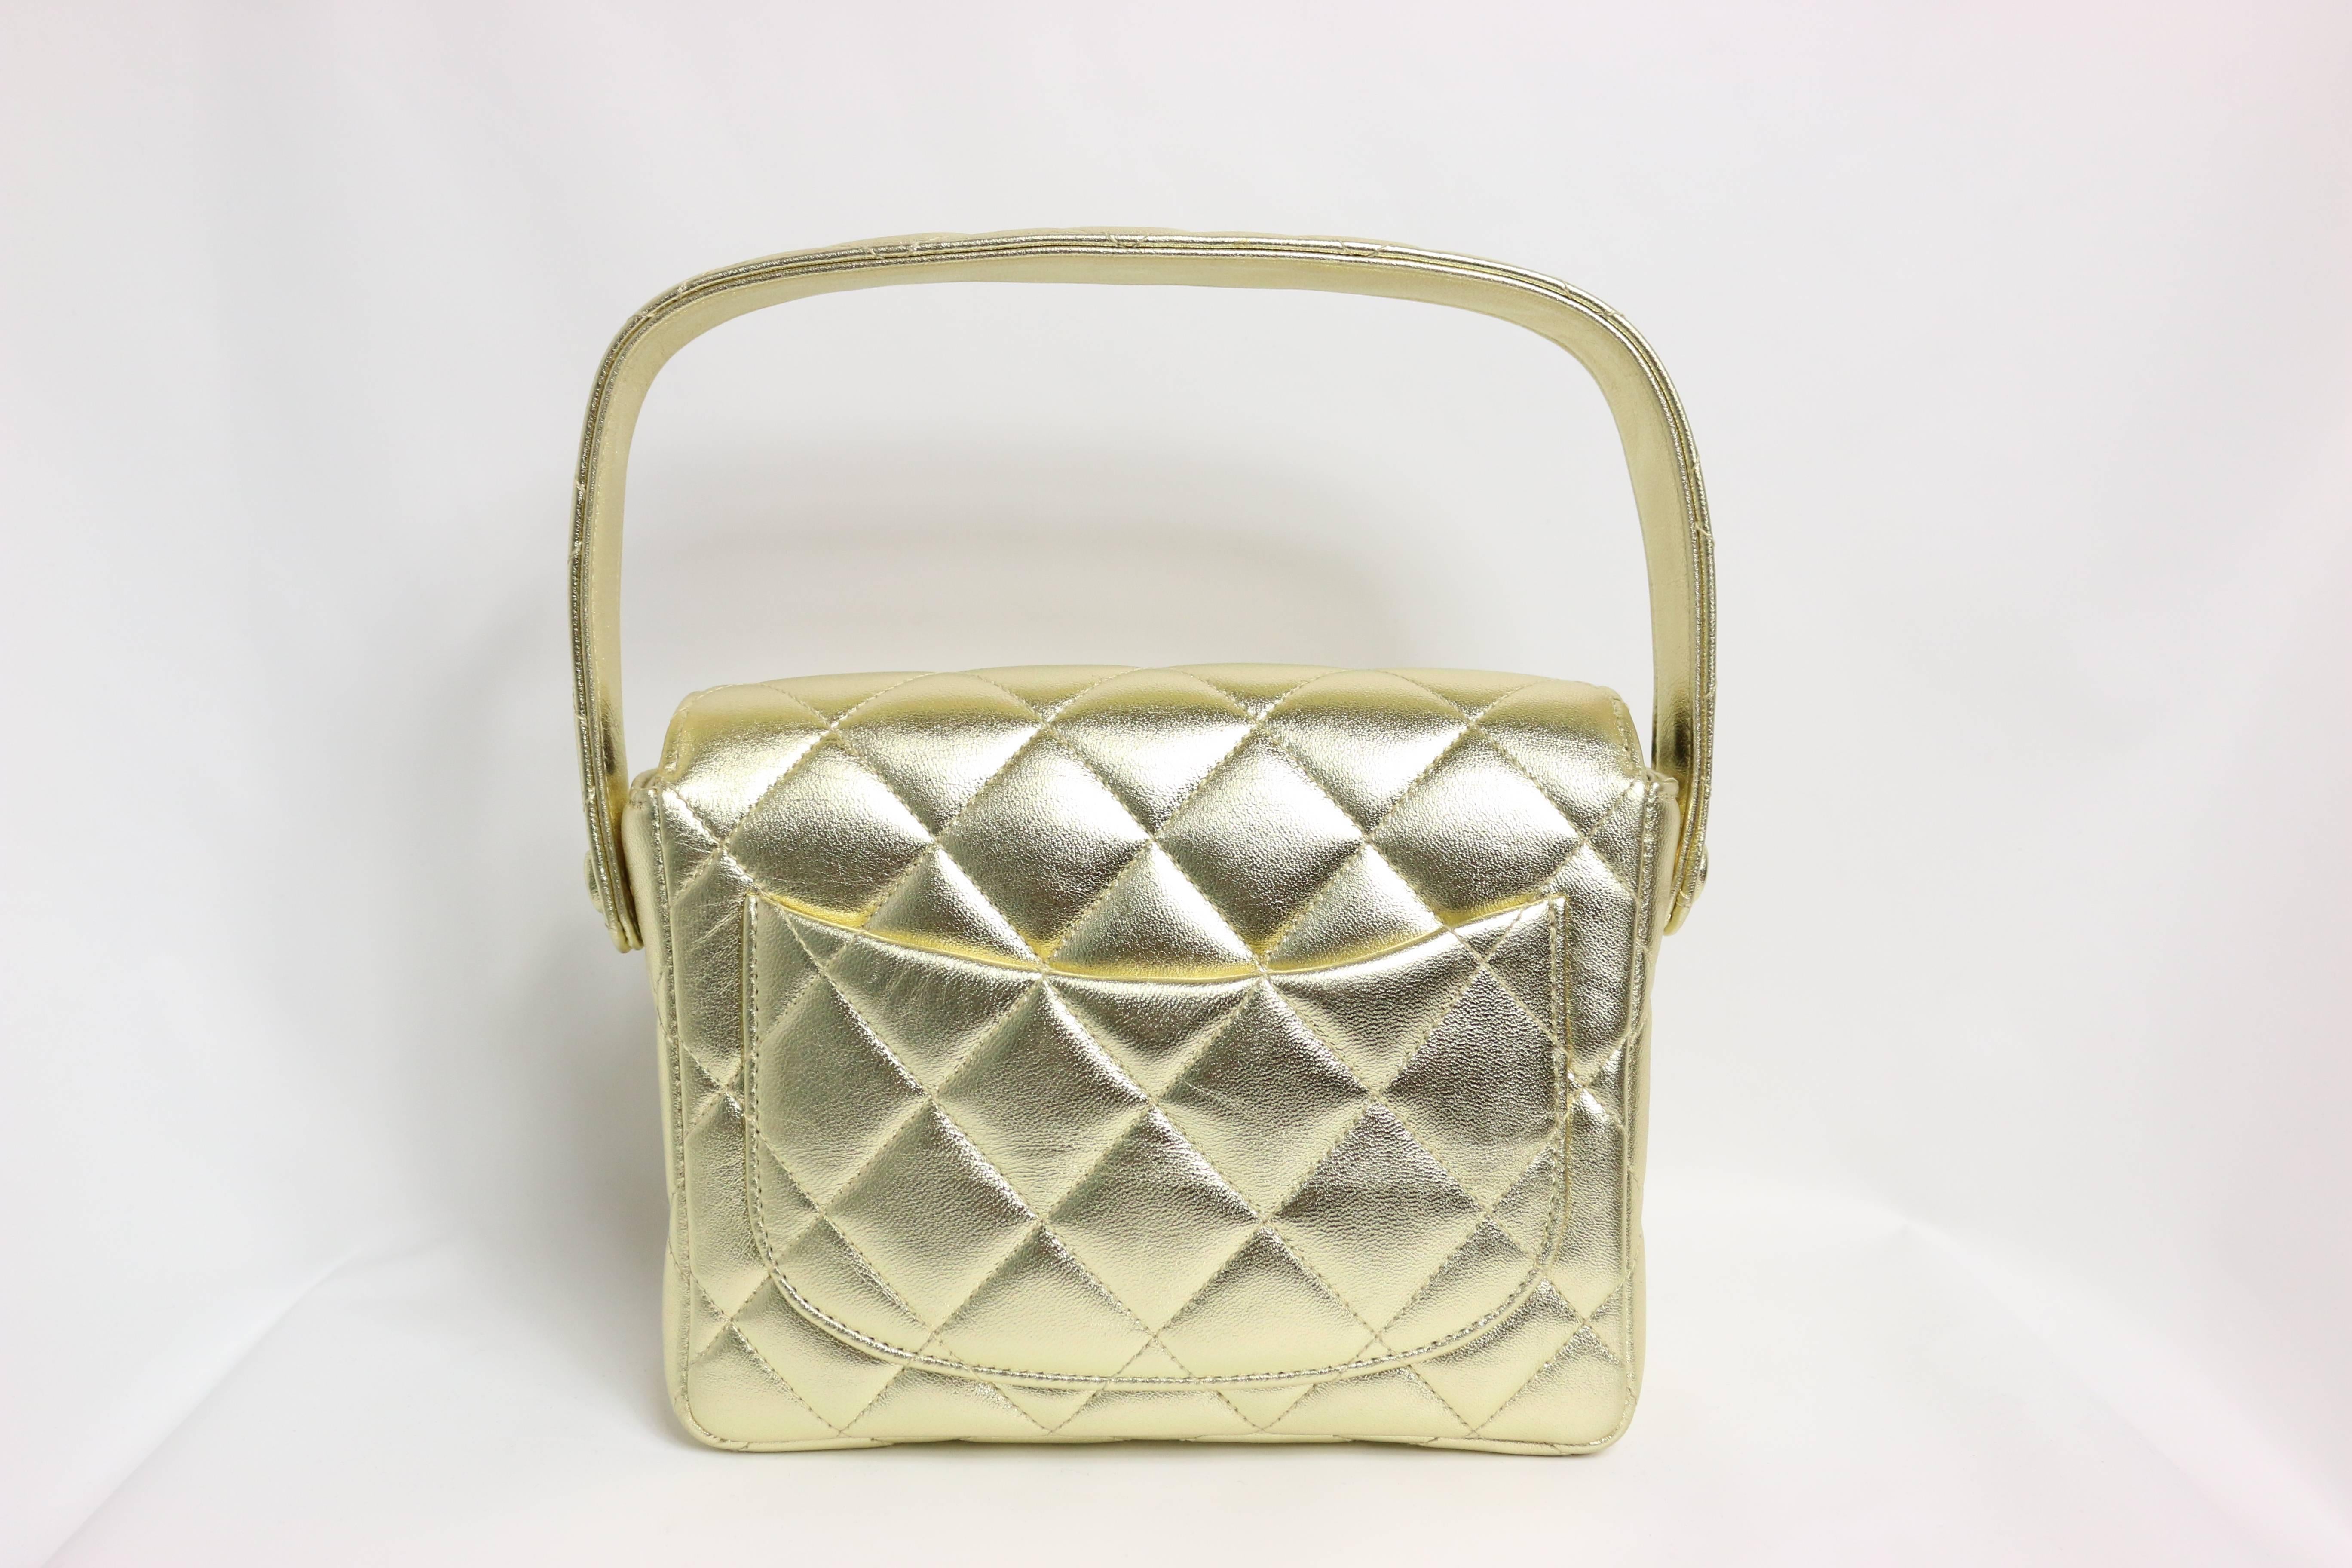 - Chanel square mini gold metallic lambskin leather quilted flap handbag from 1996 to 1997 collection. 

- The interior is lined in a metallic leather

- Height: 5.51 inches / 14 cm
  Width: 6.5 inches / 16.5 cm
  Depth: 1.97 inches / 5 cm
  Handle